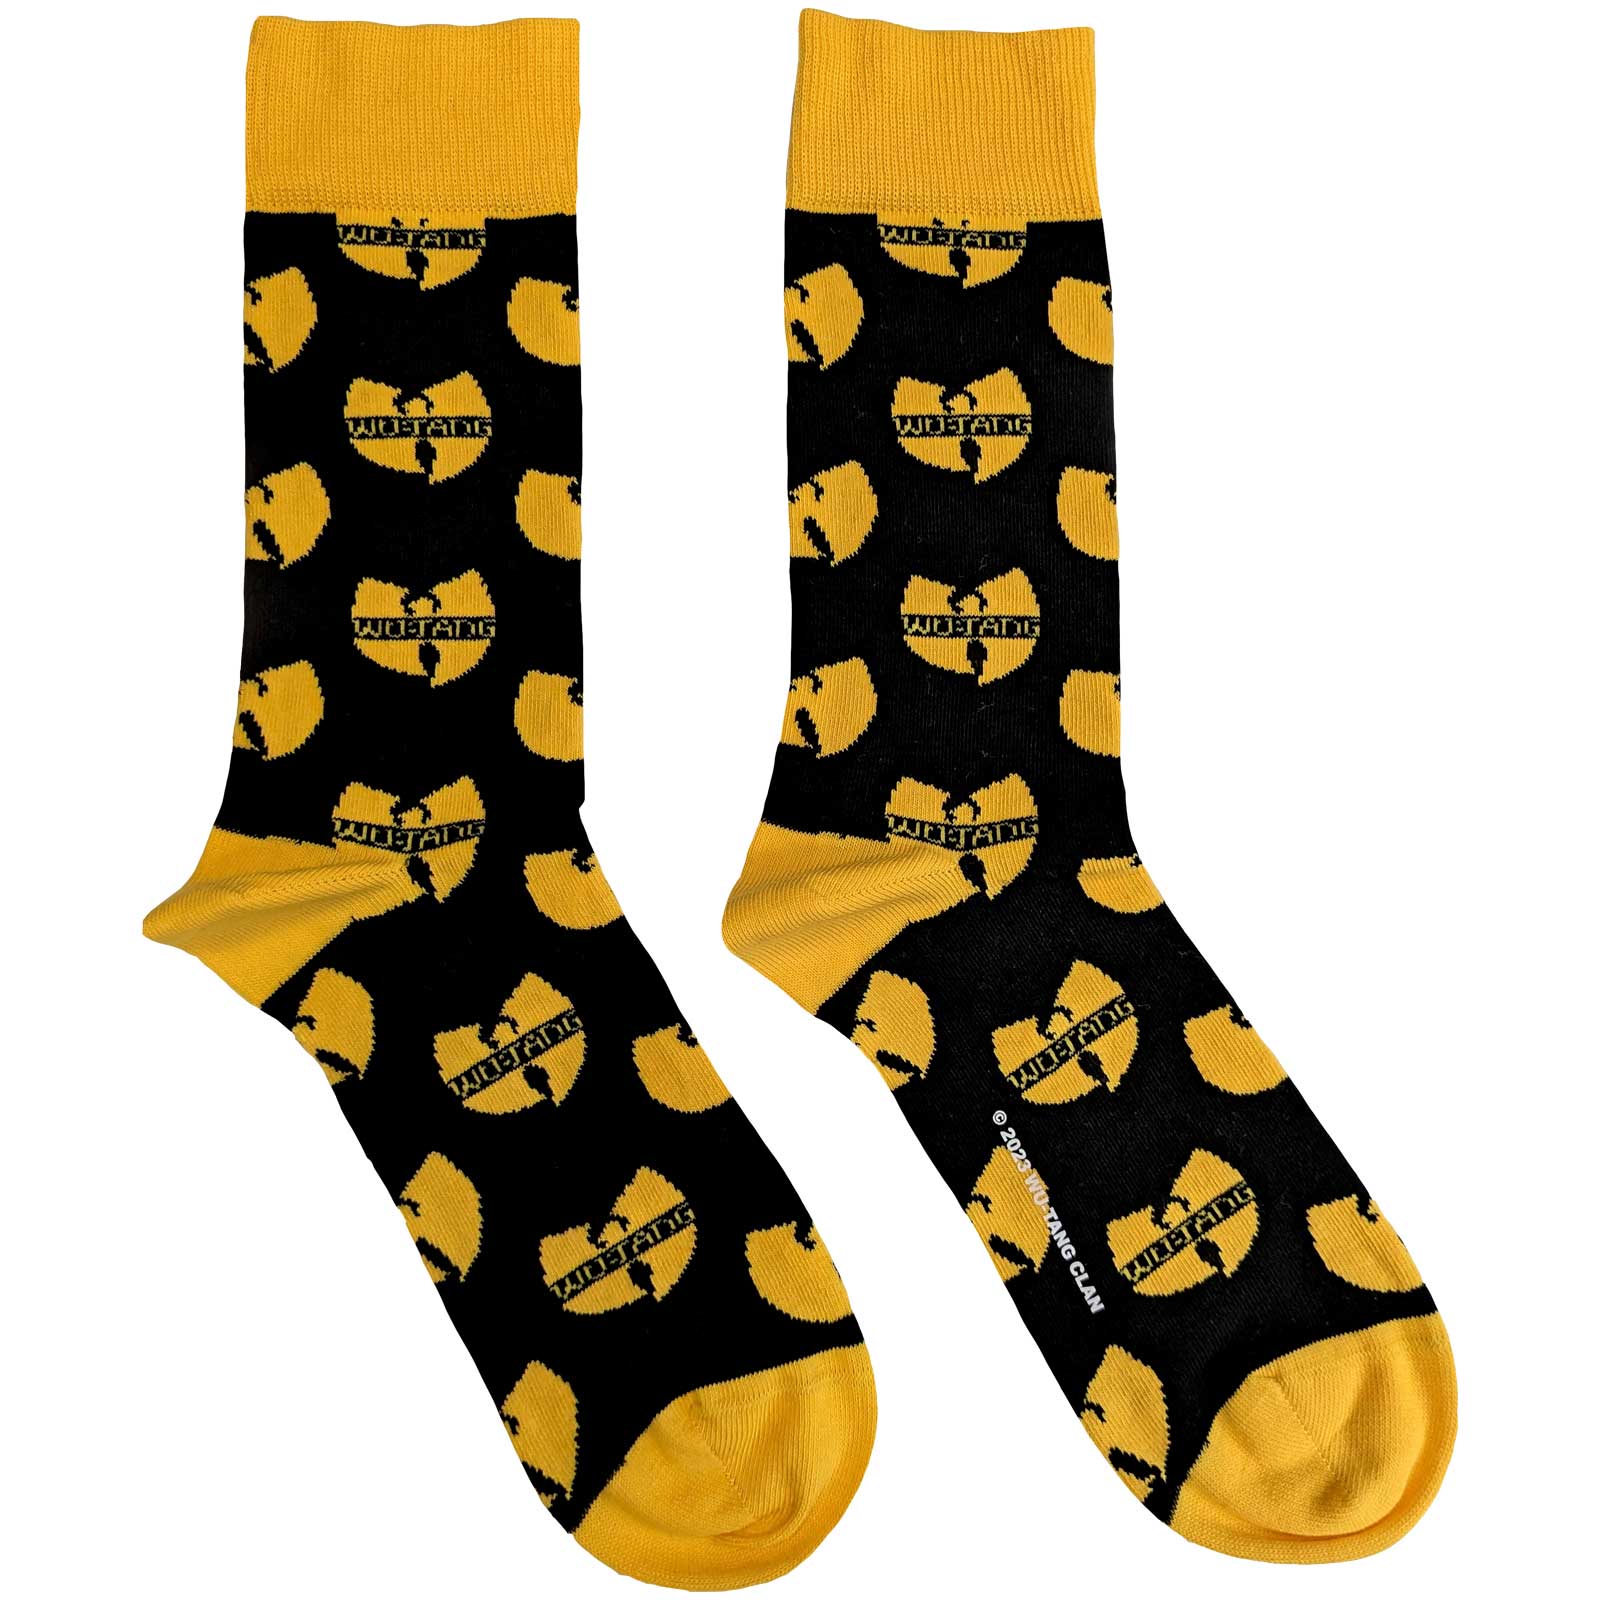 Wu-Tang Clan - Crew Socks (Fits Sizes 7 to 11) - Logo Repeat